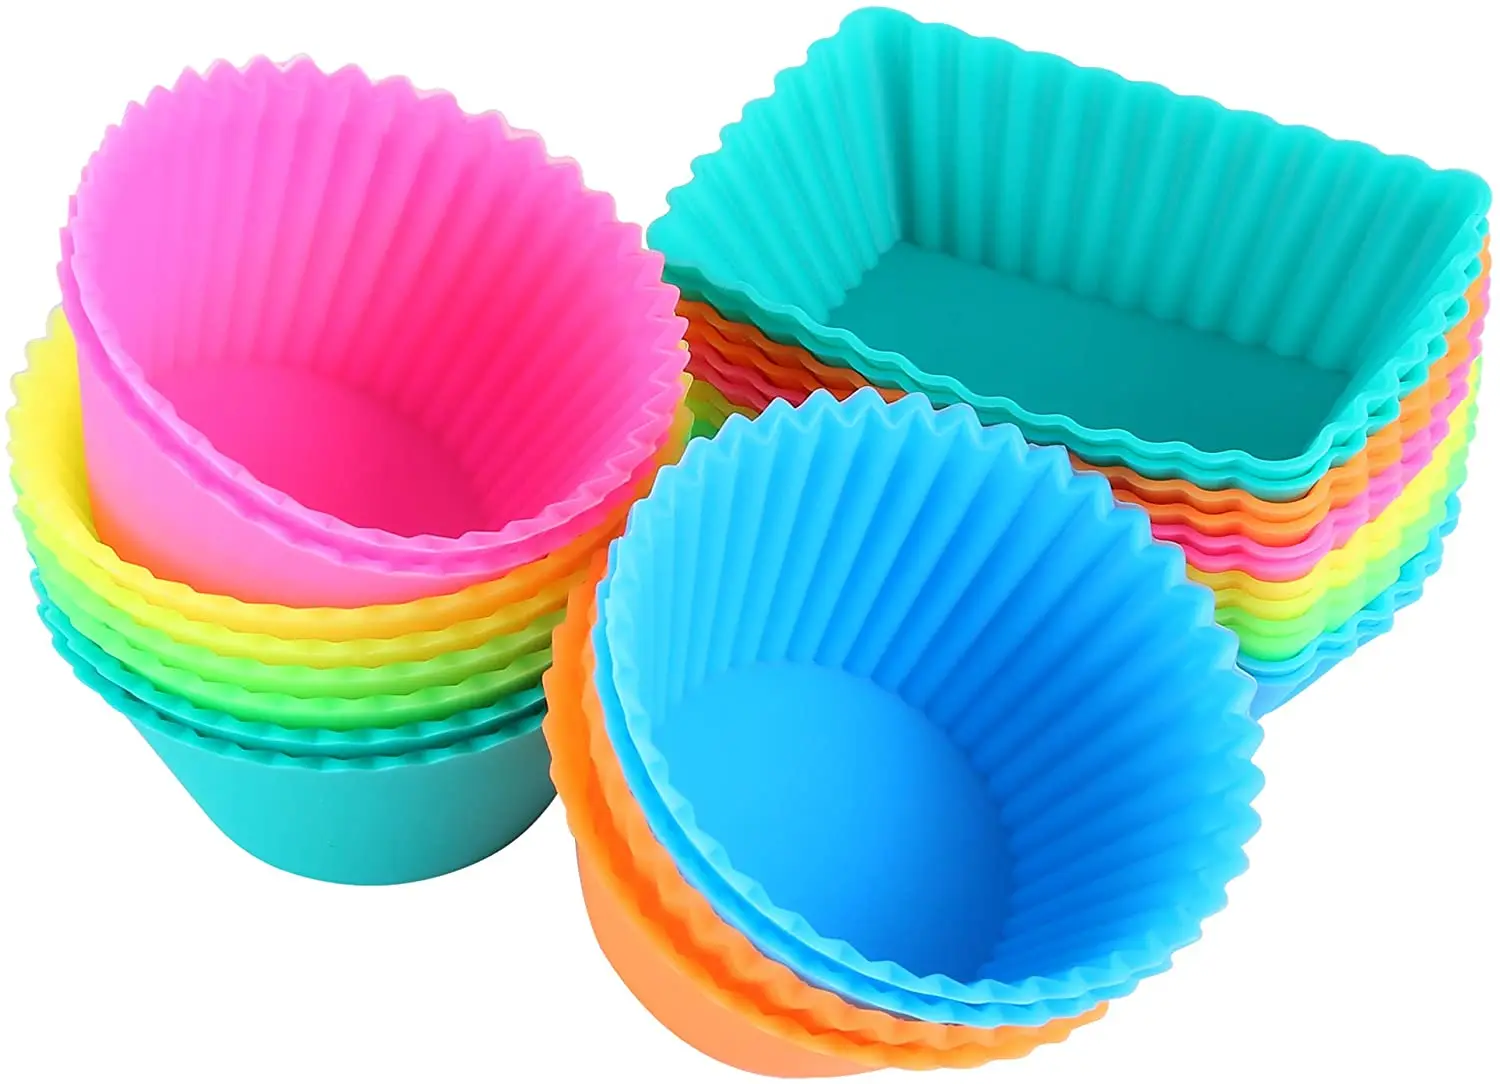 

24Pack Silicone Cupcake(12pc Round +12pc Rectangle ) Baking Cups Reusable Food-Grade BPA Free Non-Stick Muffin Liners Molds Set